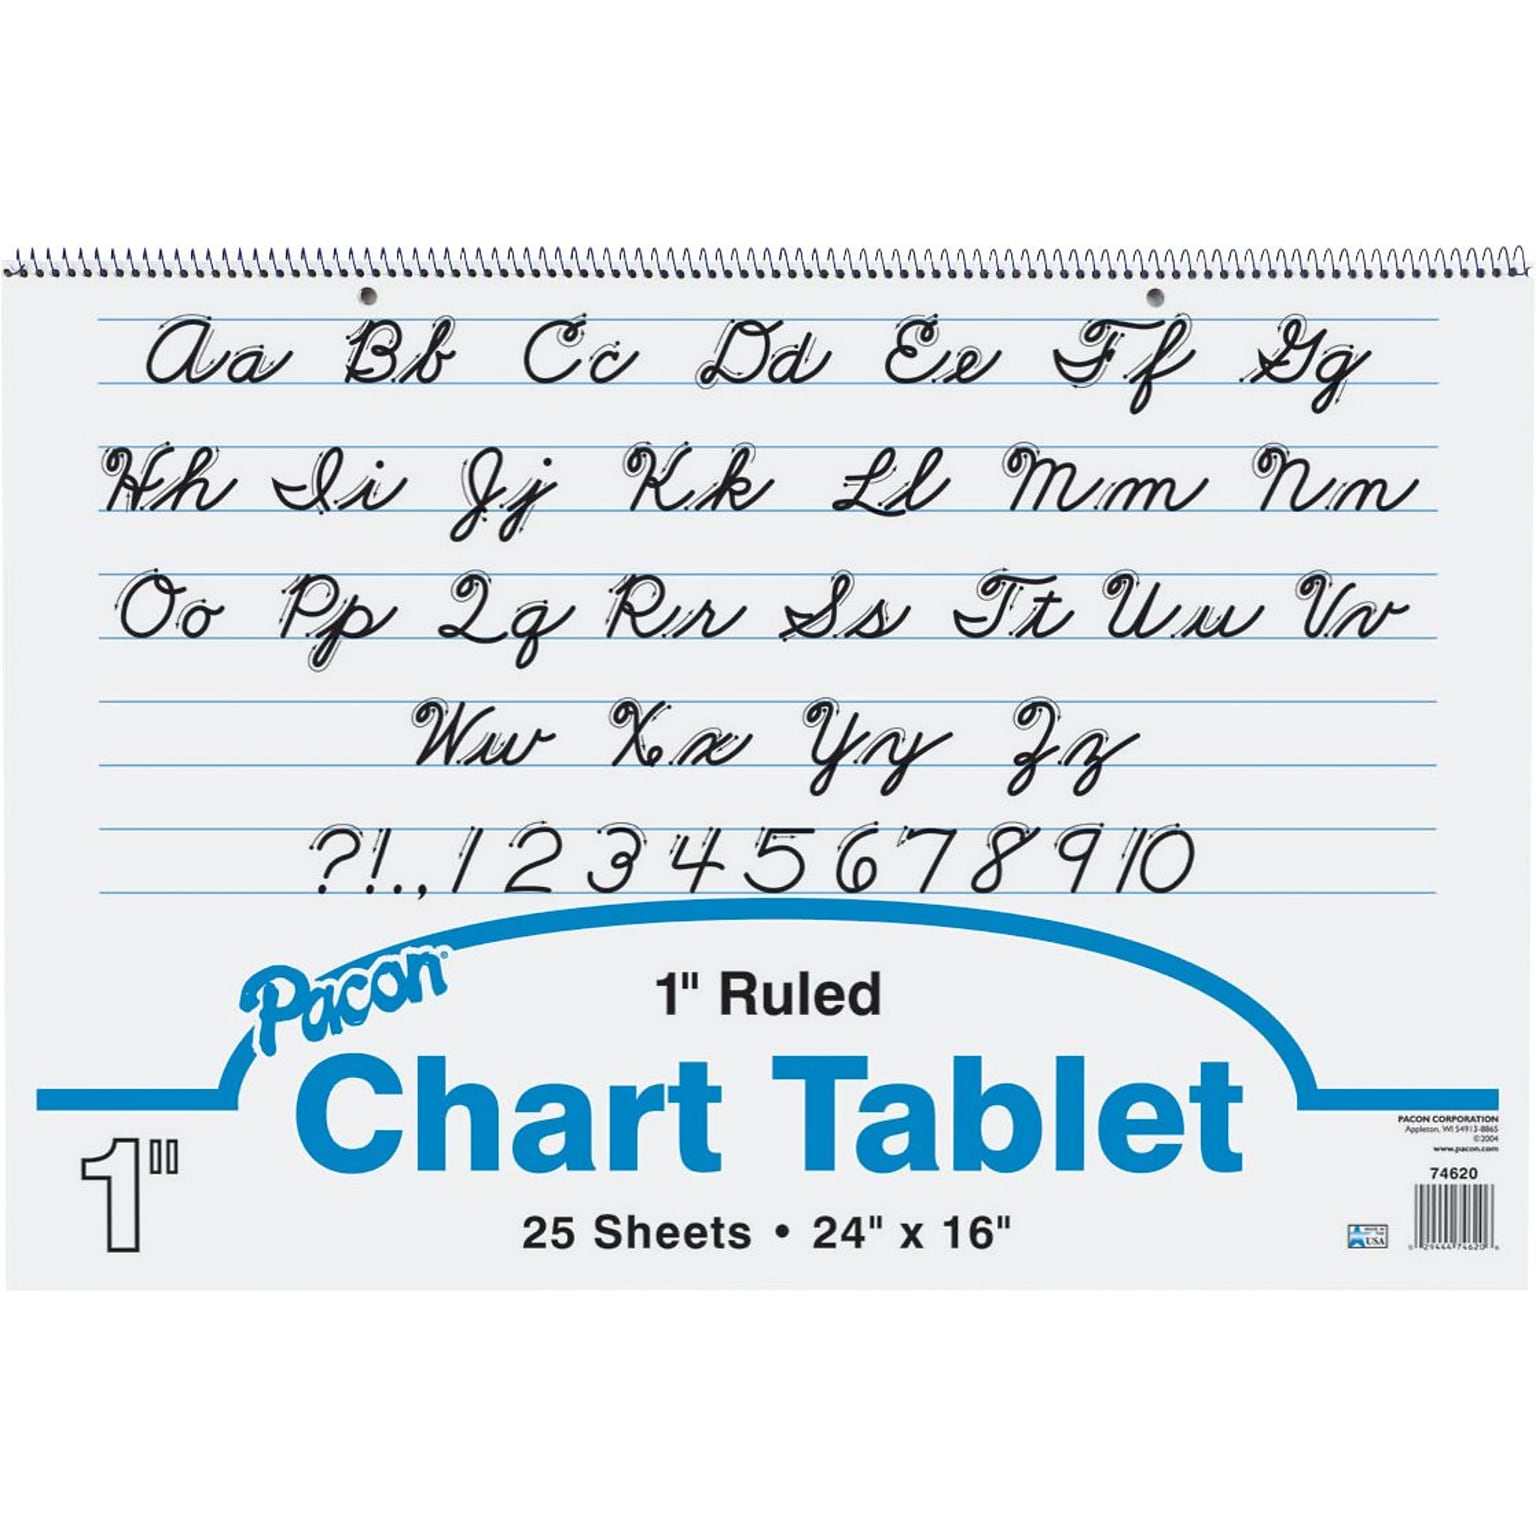 Pacon Two-Hole Punched Chart Tablet with Cursive Cover, 24 x 16, Ruled, 30 Sheets/Pk